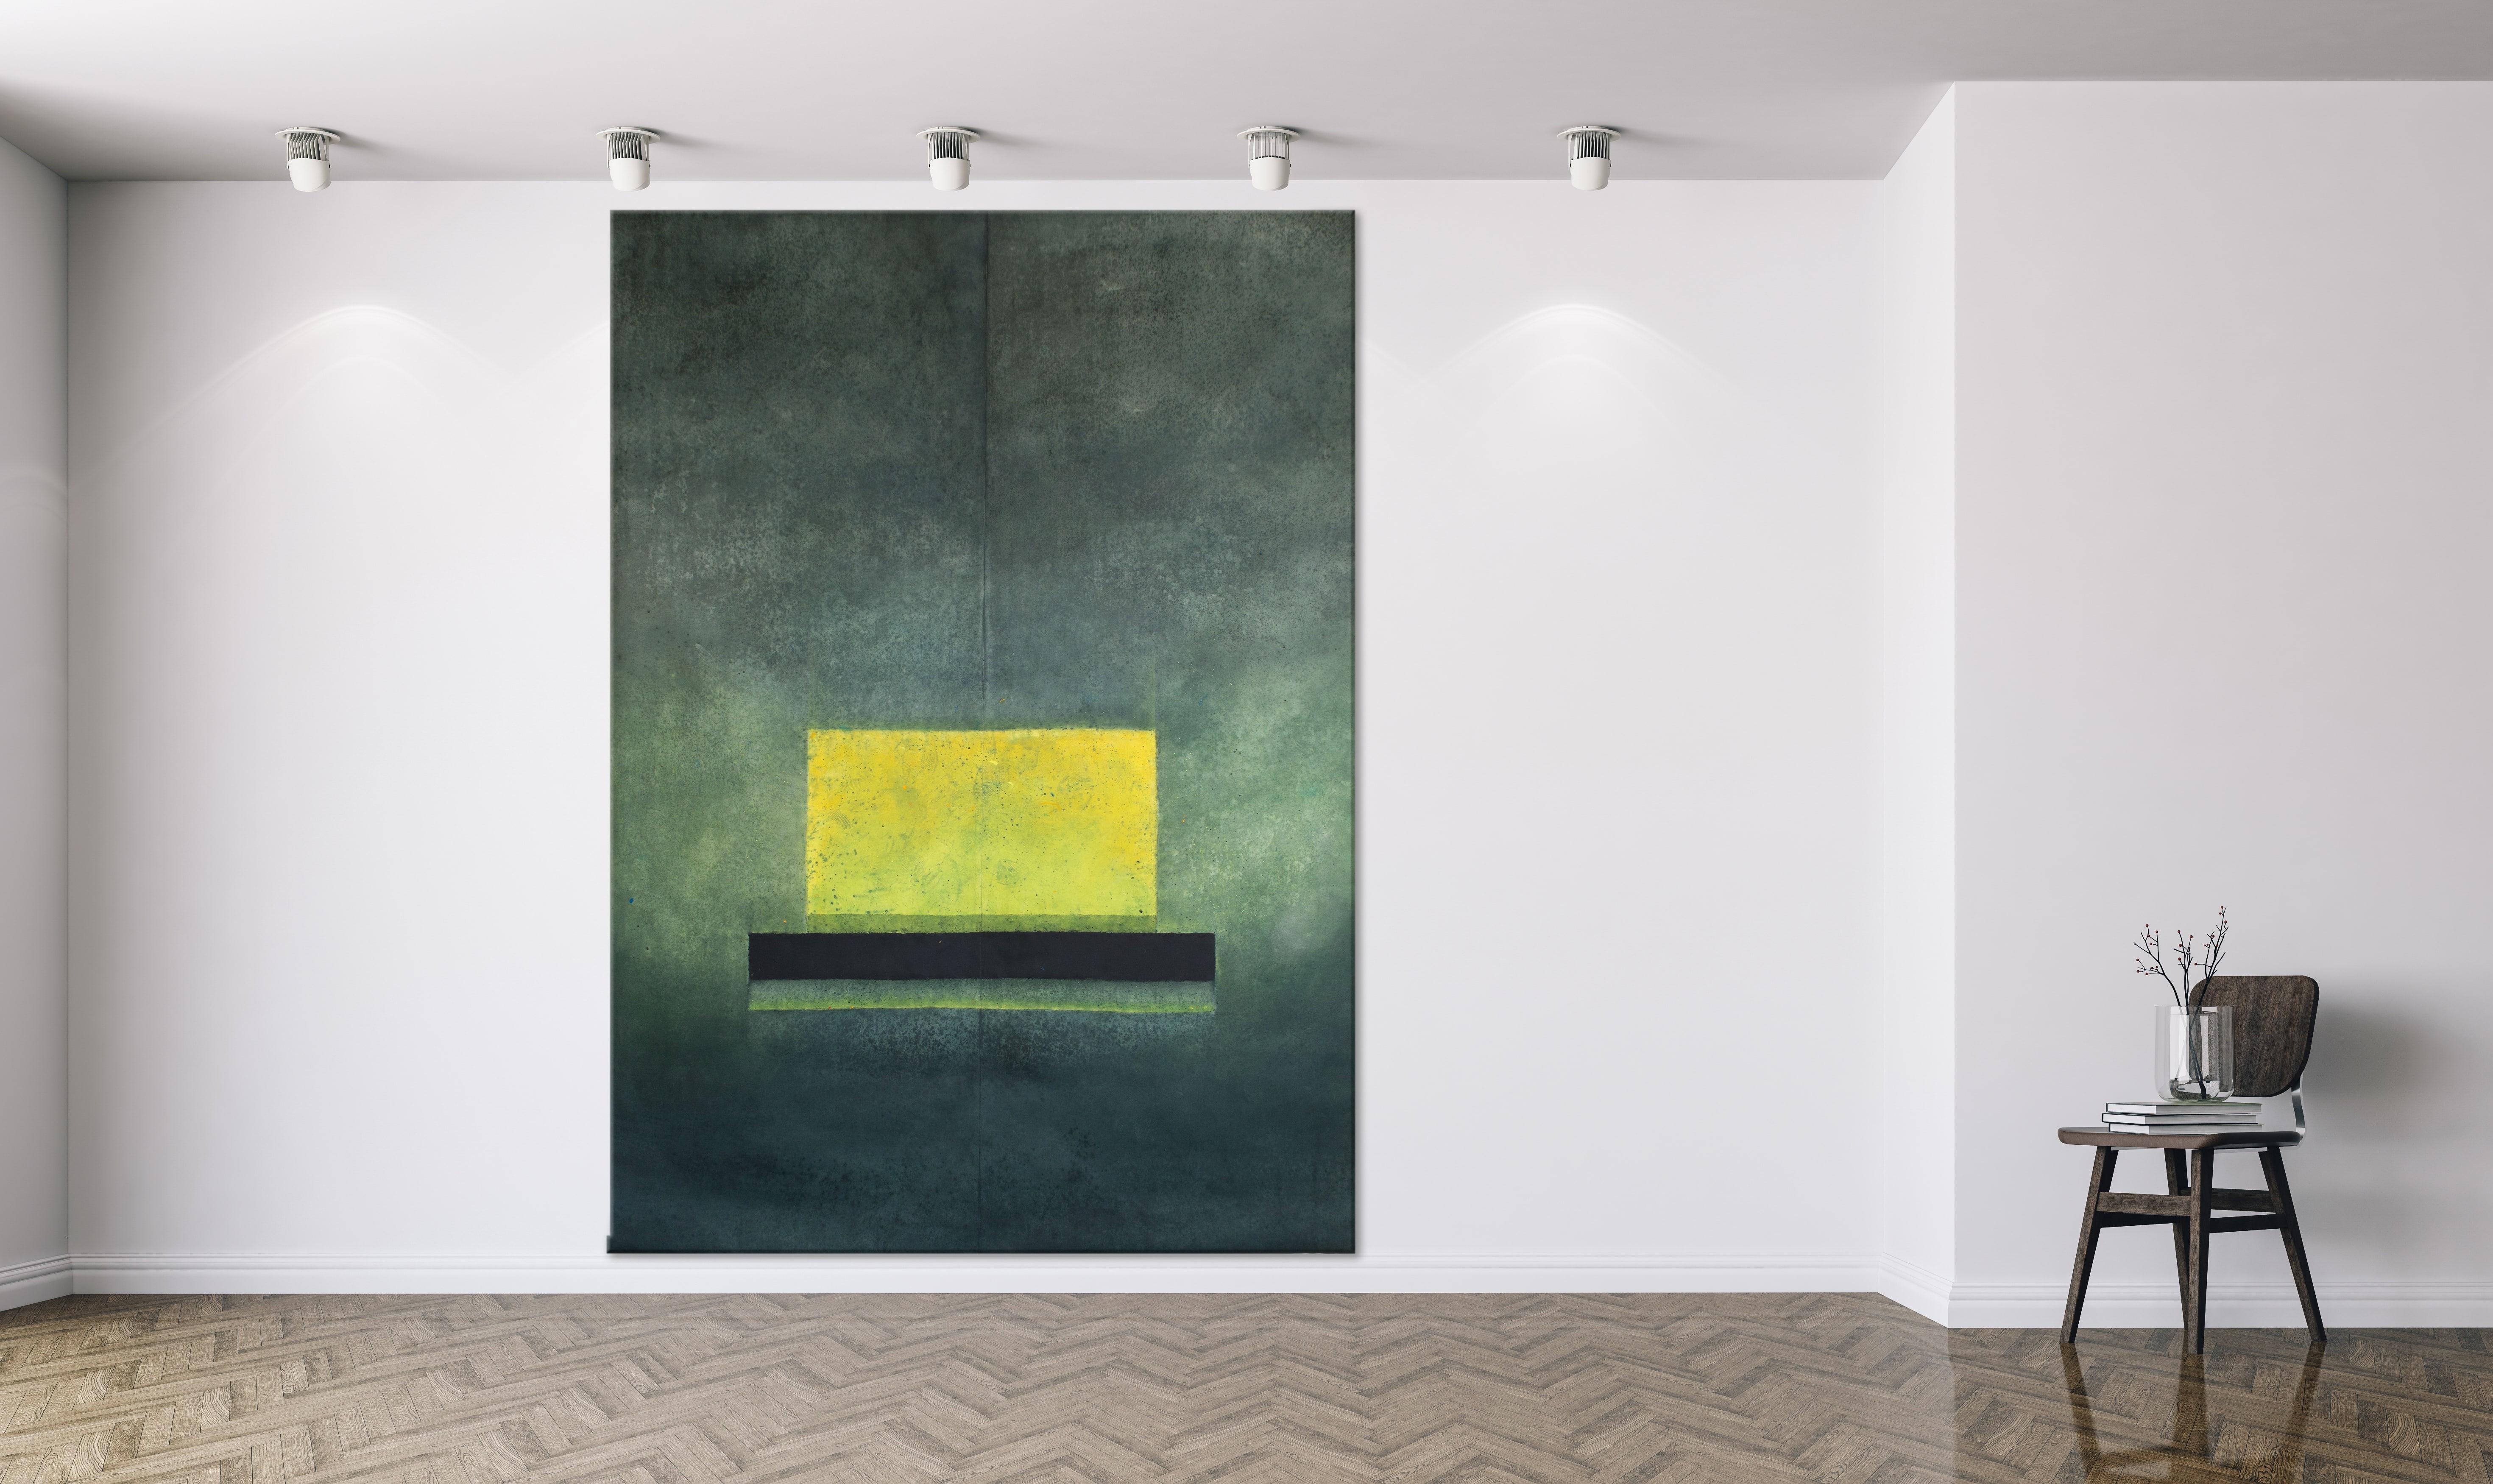 Untitled XXV by Ferle - Large abstract painting, green tones, spiritual, yellow - Painting by Elvire Ferle